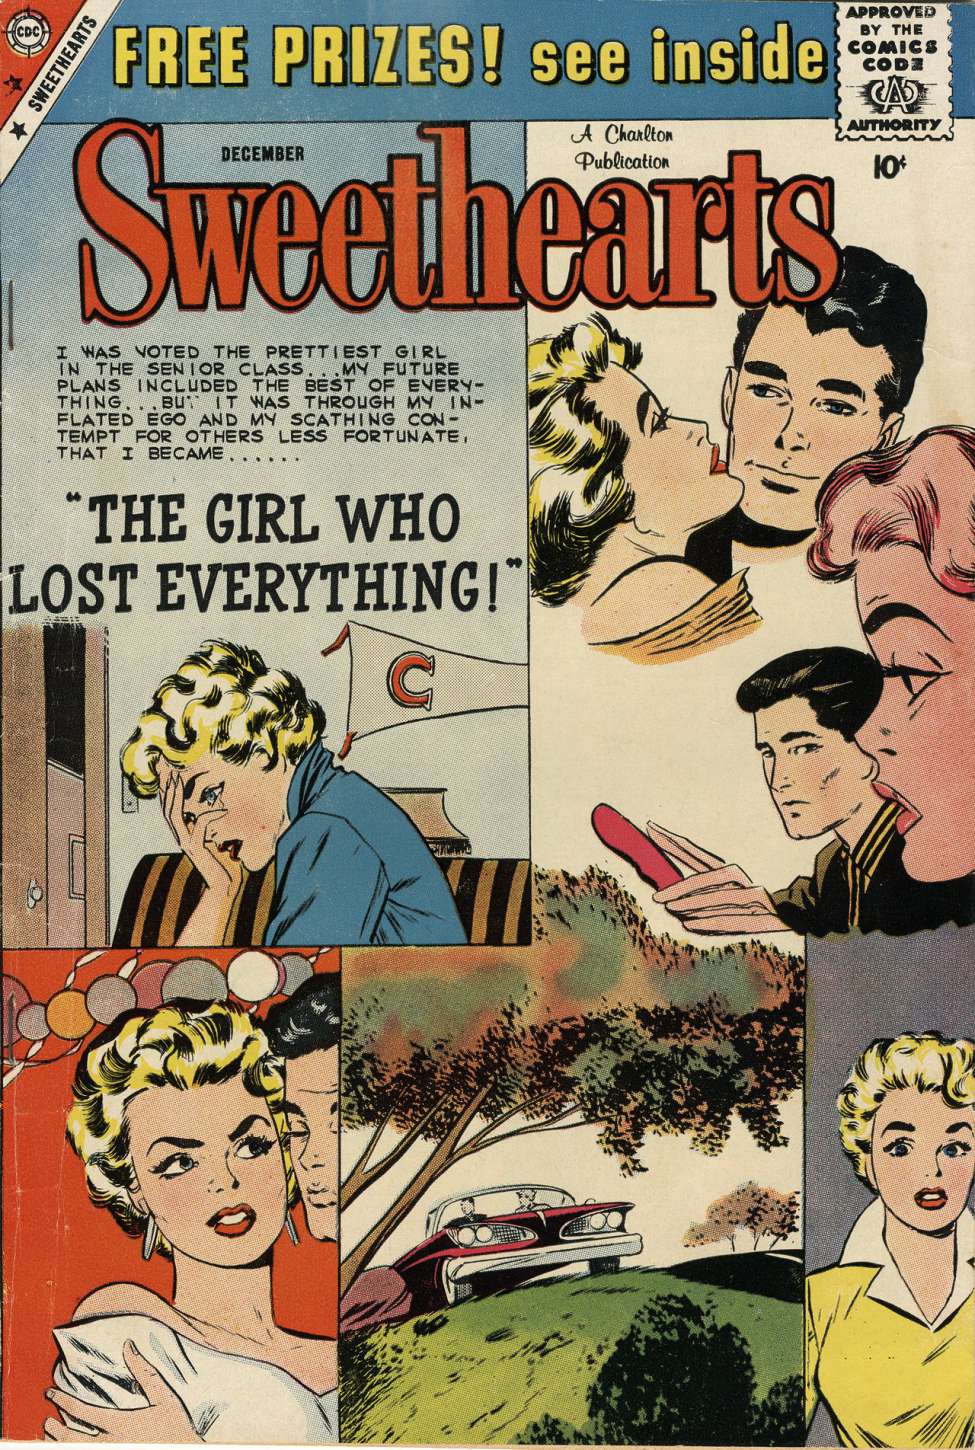 Book Cover For Sweethearts 51 - Version 1